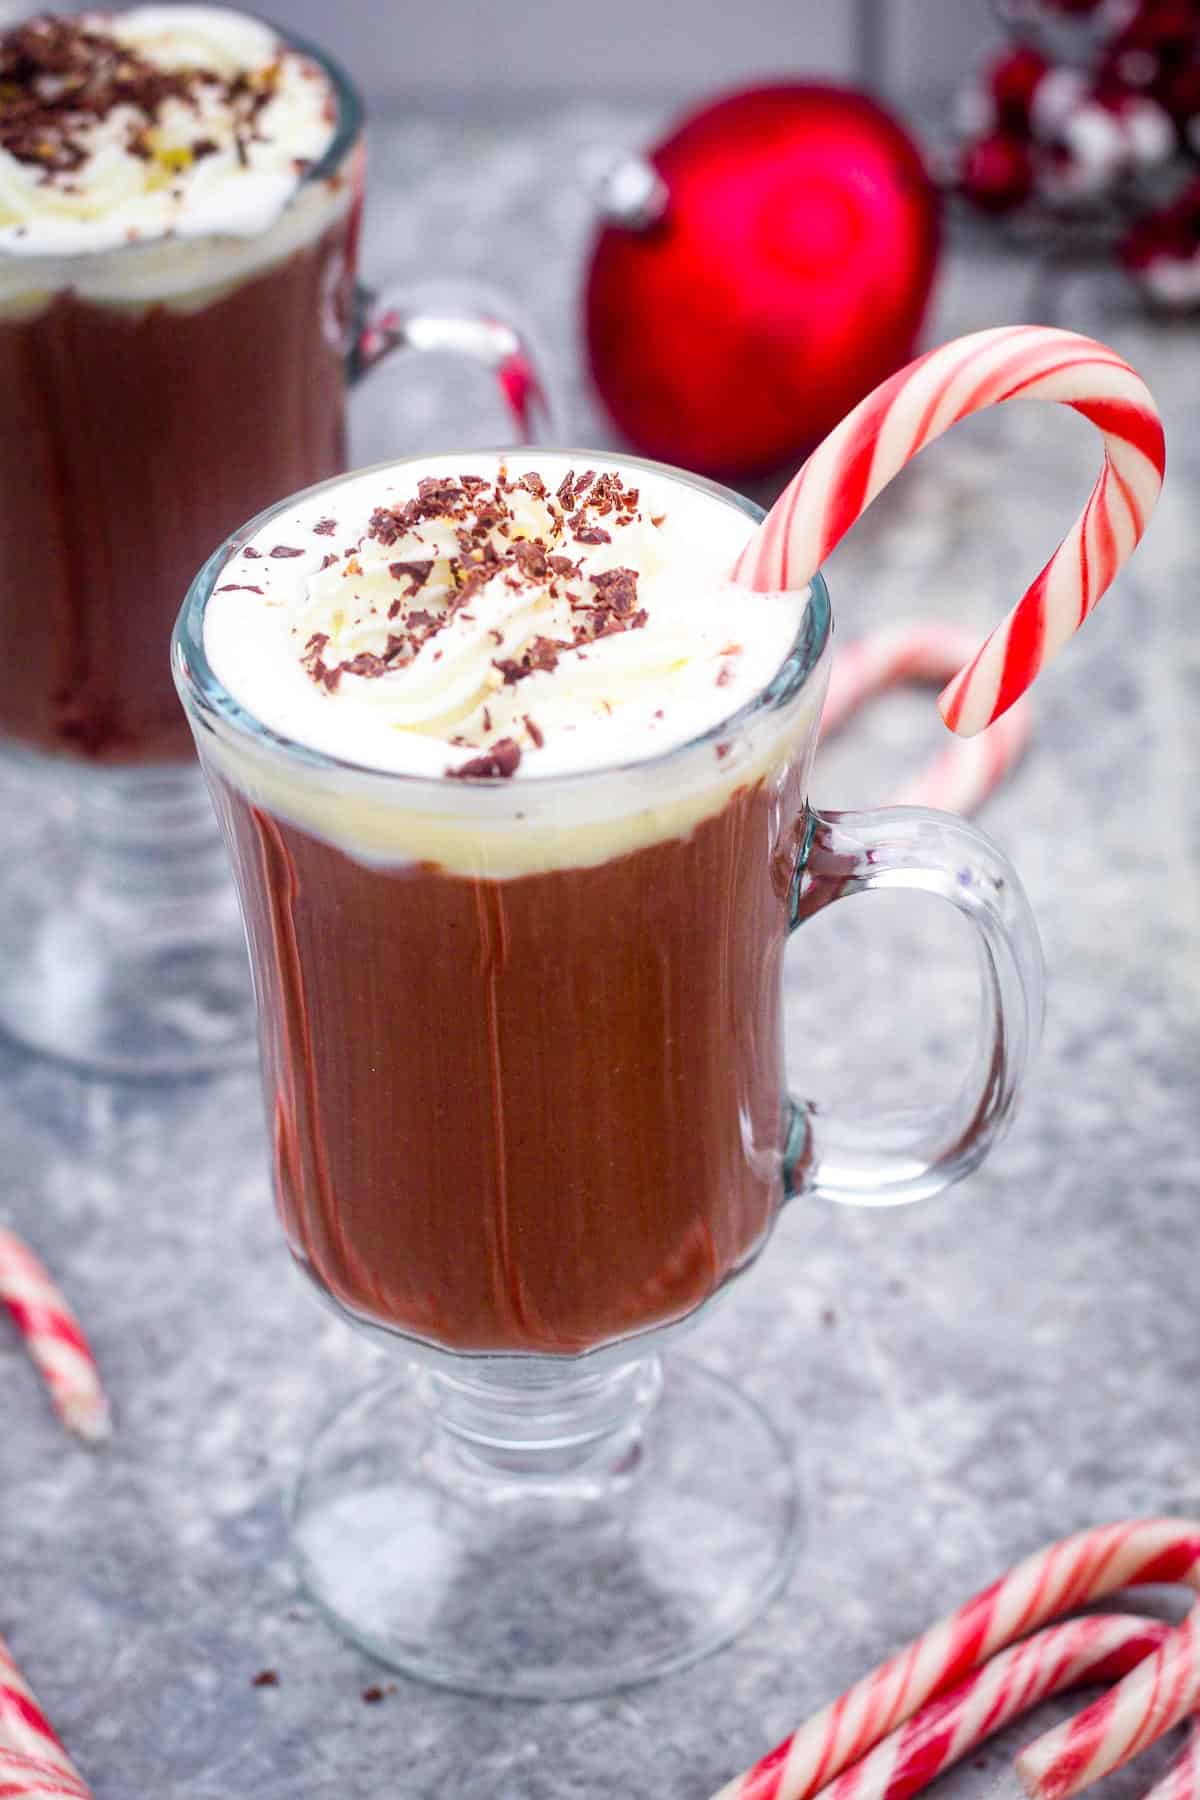 A cup of hot cocoa with whipped cream and toppings served in a festive setting with candy canes.